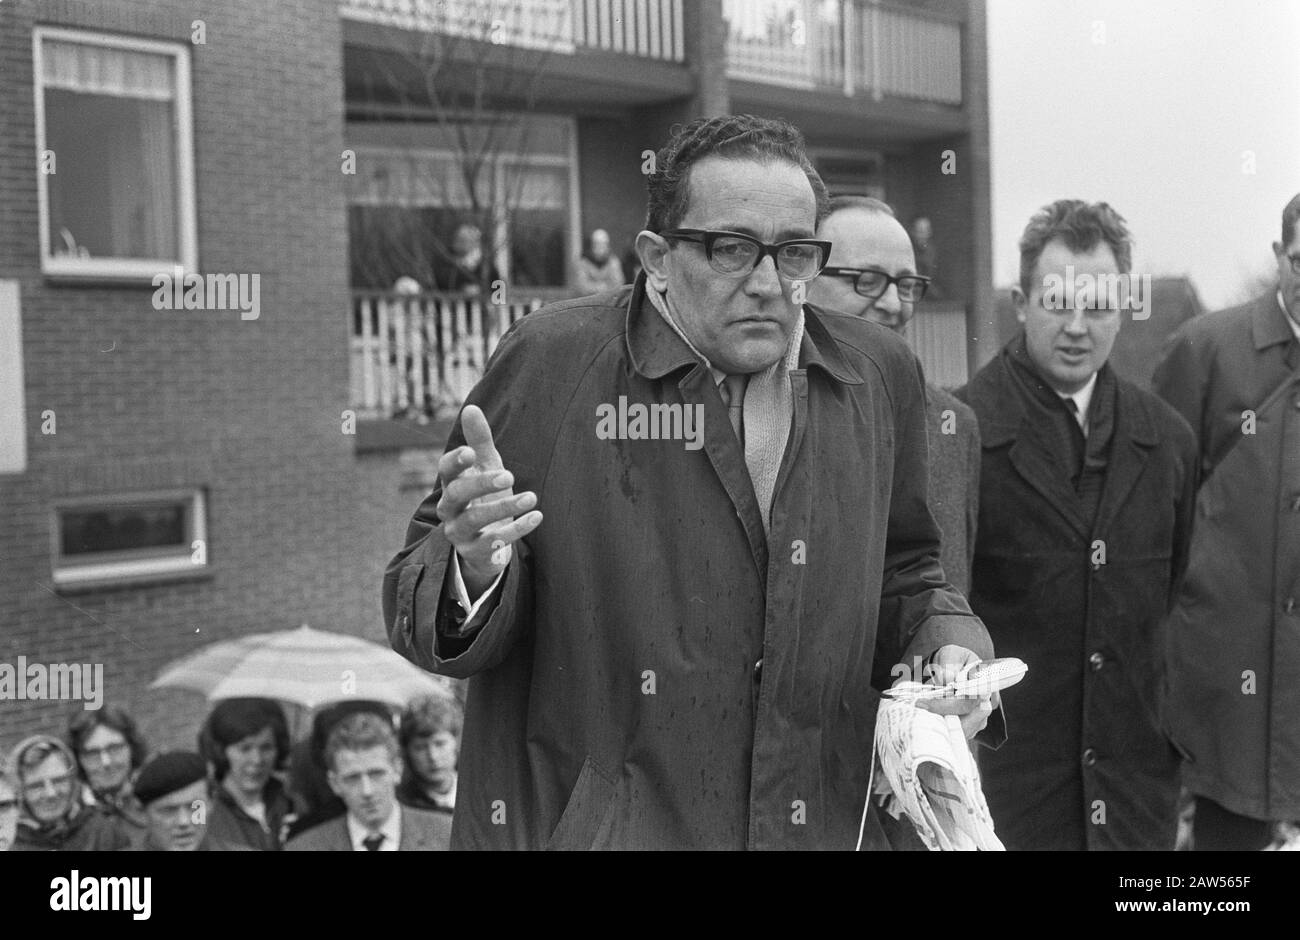 raisin roll of eight meters in Hardenberg Dr Muller, president party Gemeentebelangen Hardenberg. Date: April 23, 1966 Location: Hardenberg Keywords: raisin breads, presidents Person Name: Drs Mullers photographer. Koch, Eric / Anefo Copyright Holder: National Archives Material Type: Negative (black / white) archive inventory number: see access 2.24.01.05 Stock Photo